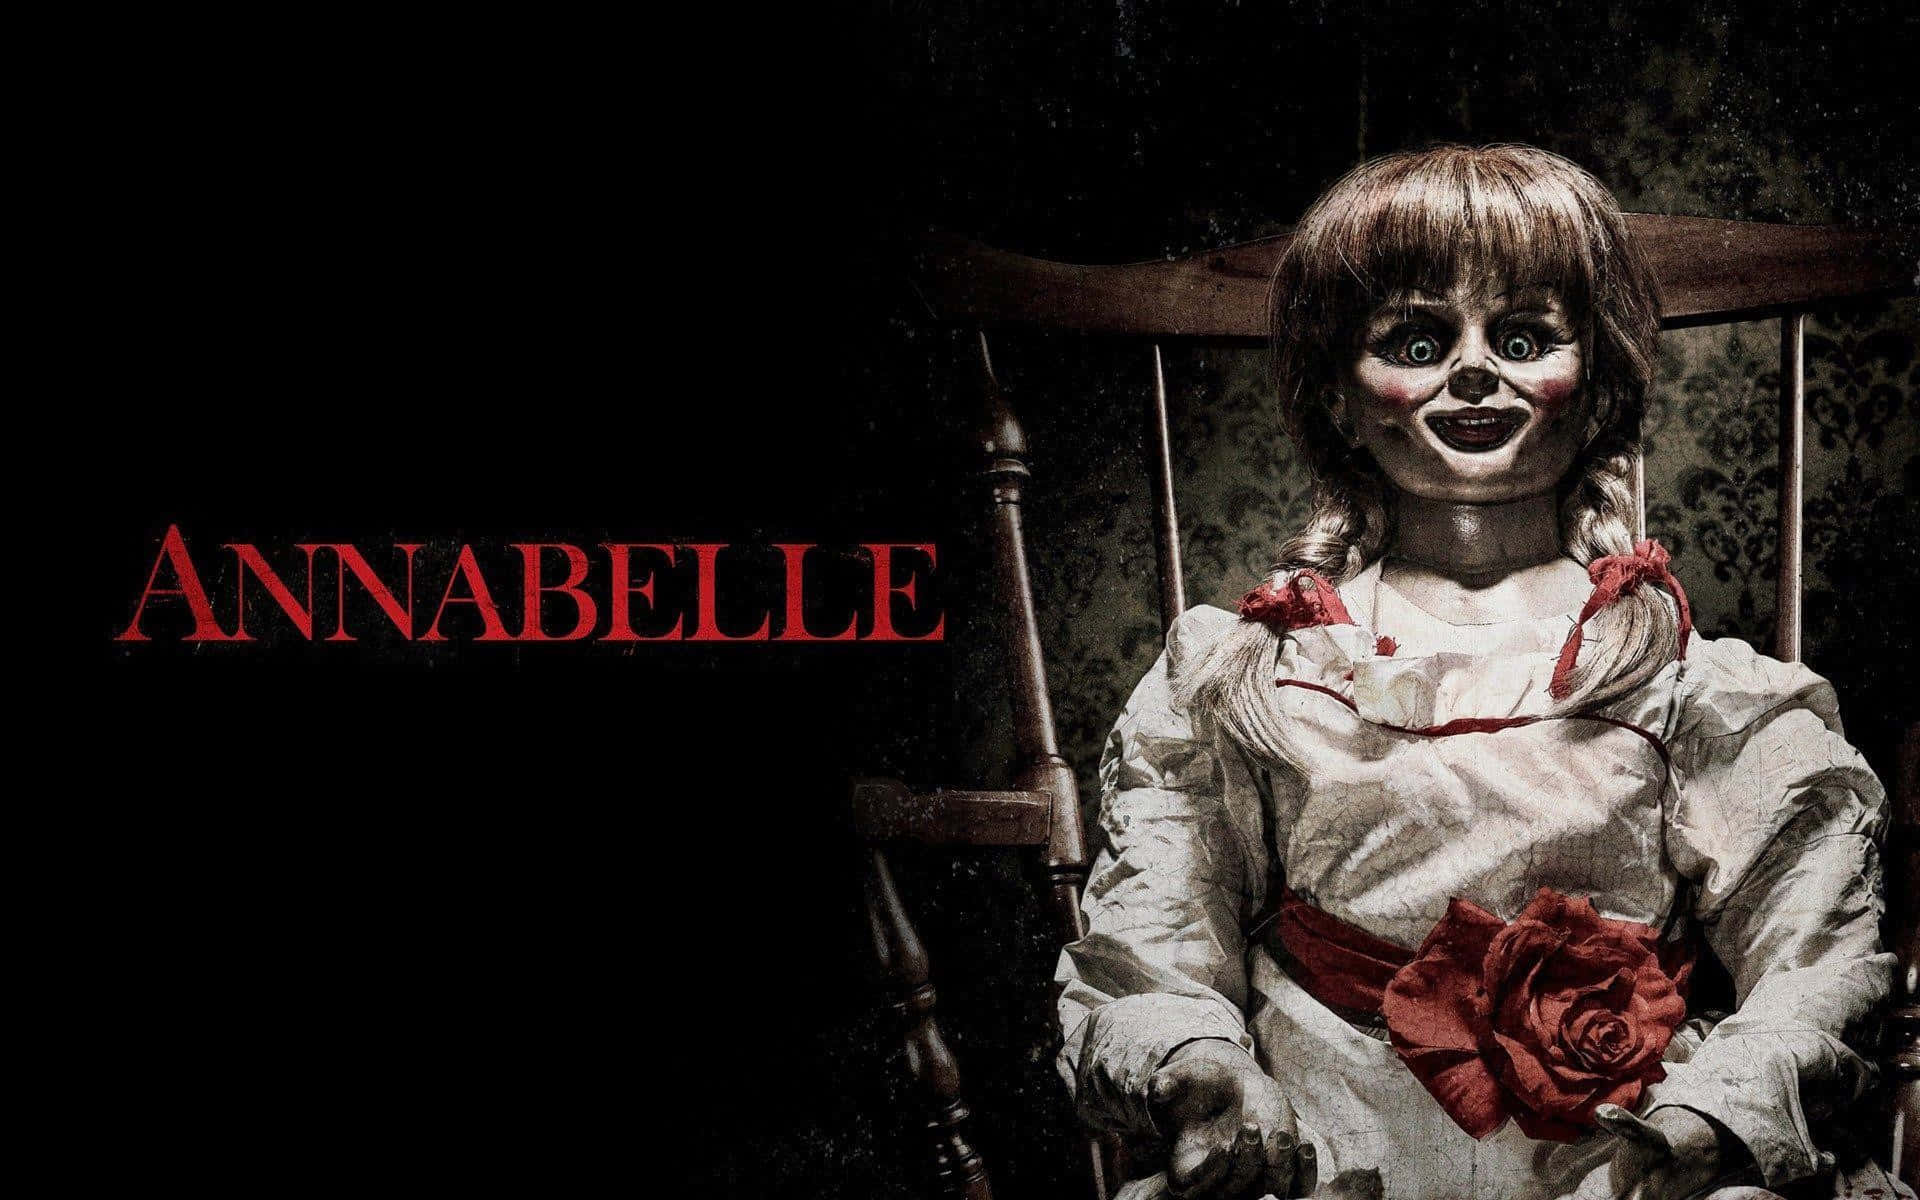 "Fear in the eyes of Annabelle"